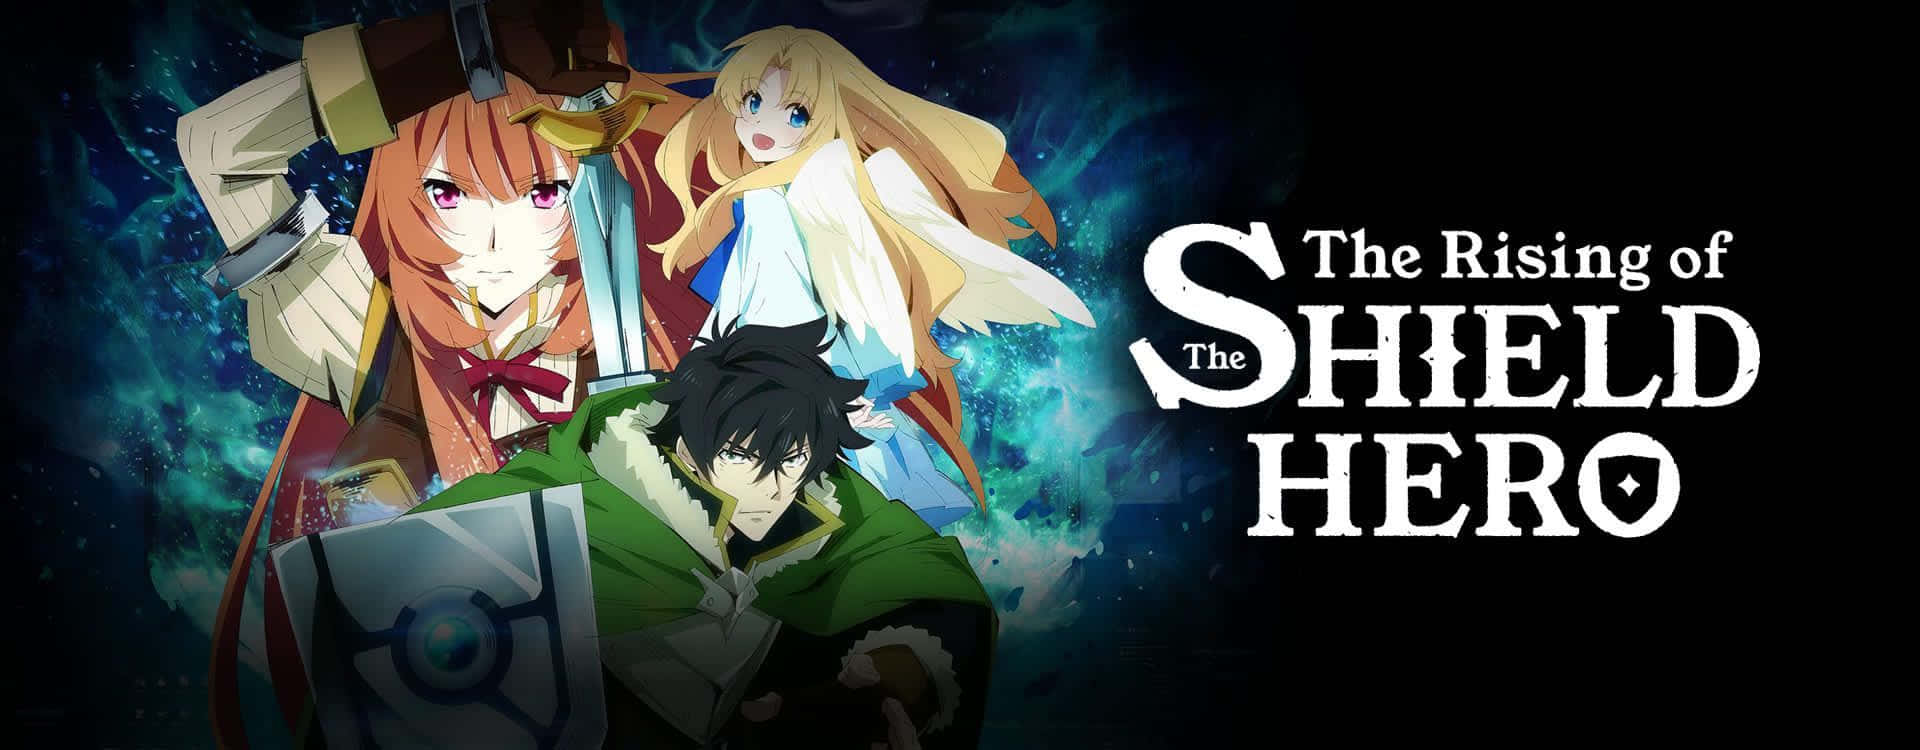 Therising Of The Shield Hero 1920 X 750 Baggrundsbillede